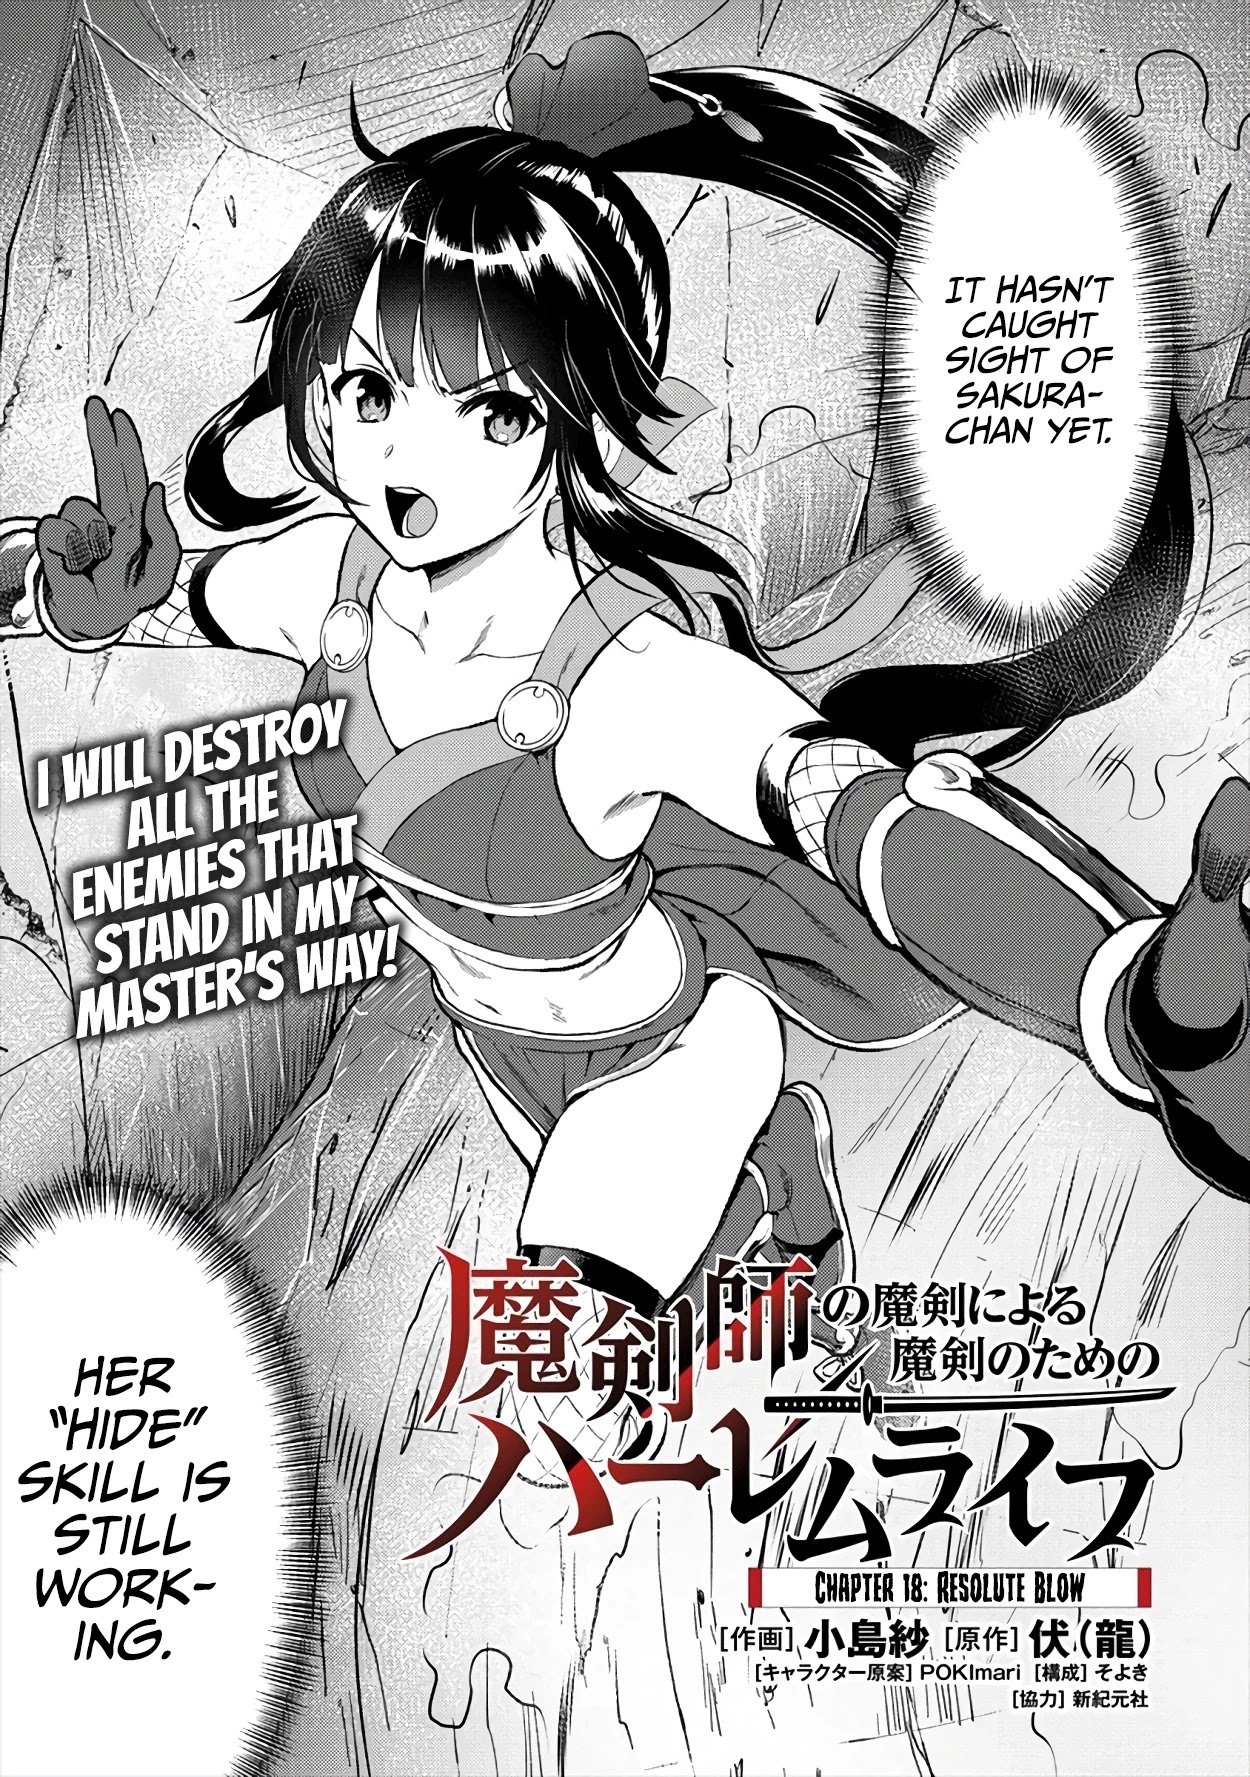 The Cursed Sword Master’s Harem Life: By the Sword, For the Sword, Cursed Sword Master - chapter 18 - #2